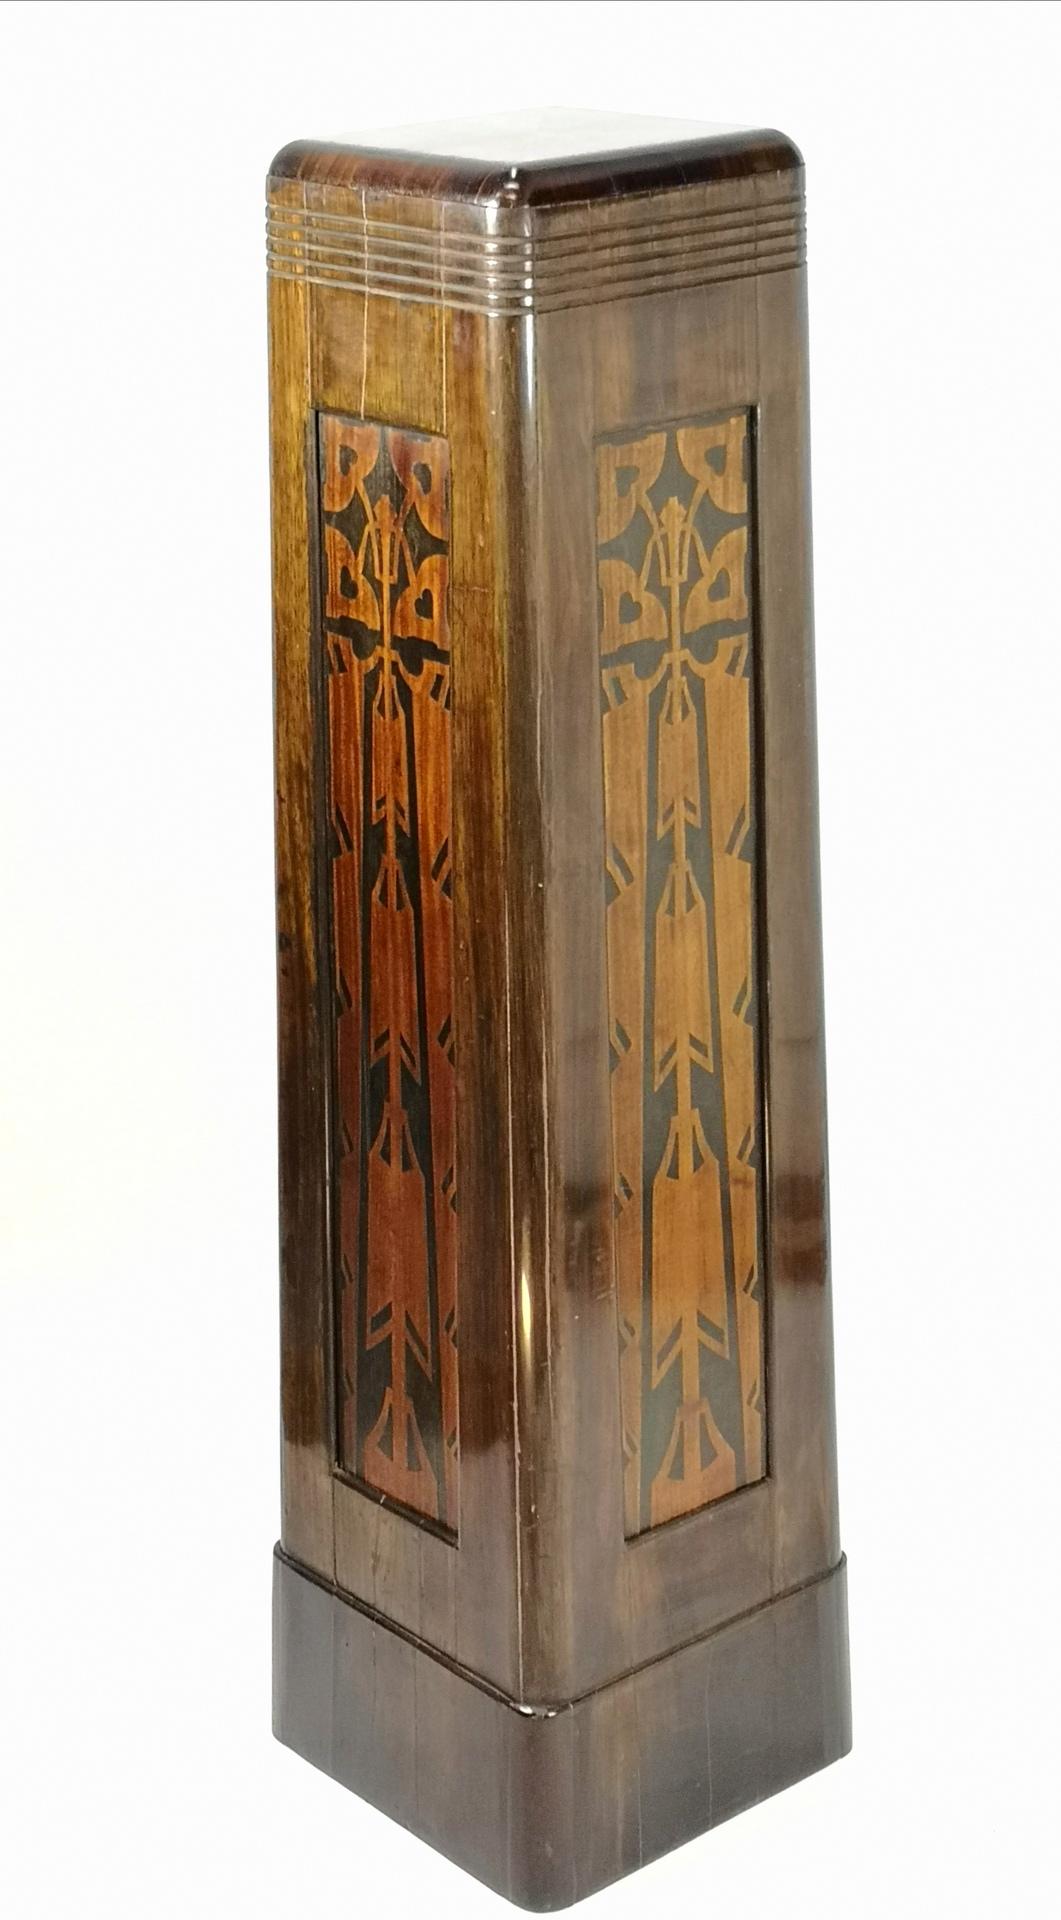 Early 20th Century Art Nouveau Pedestal or Stand, ca 1900